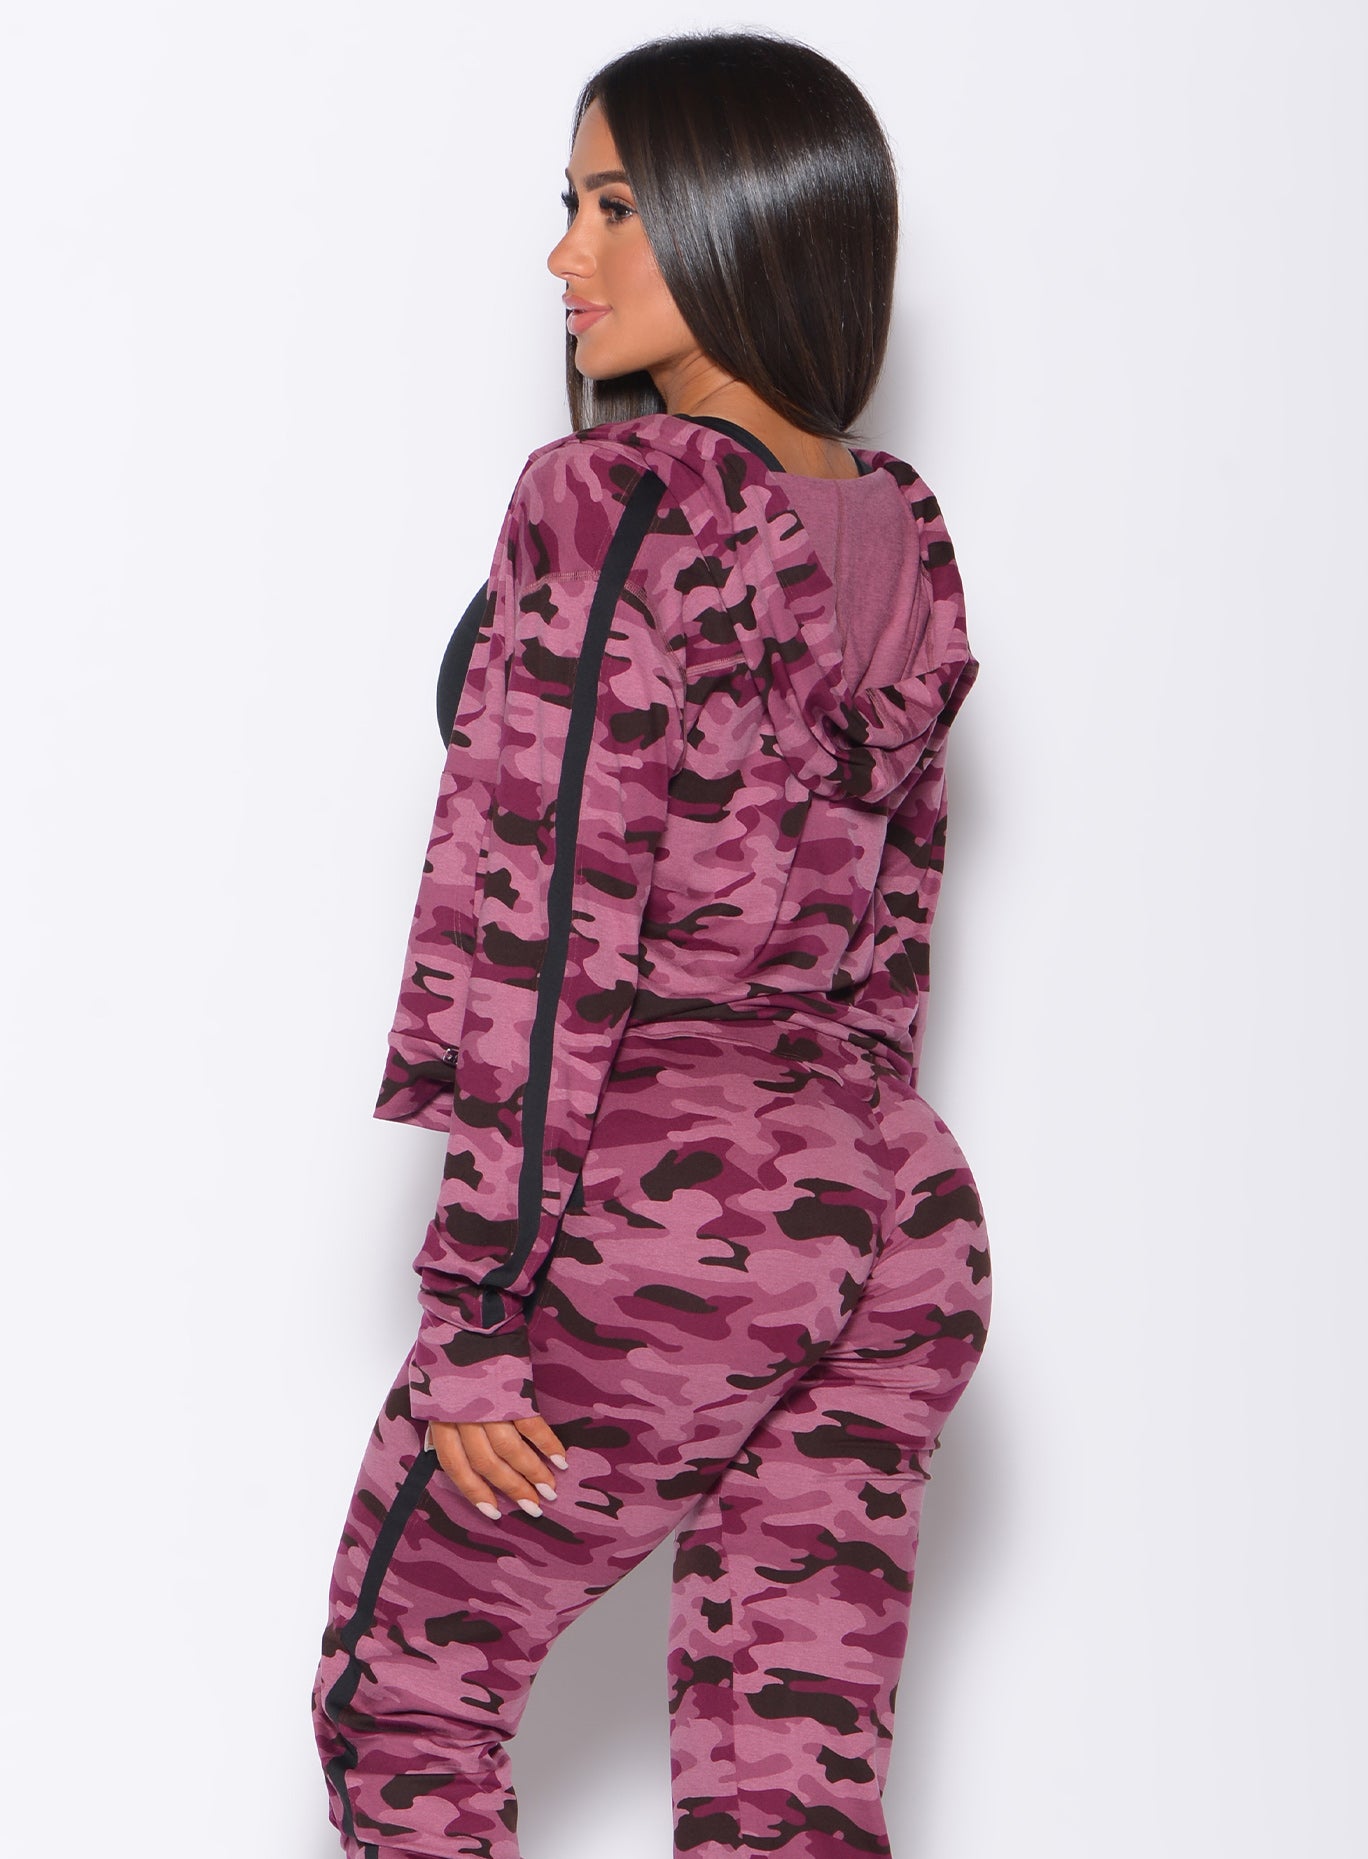 Left side profile view of a model wearing our dream jacket in Purple Power Camo color and a matching joggers